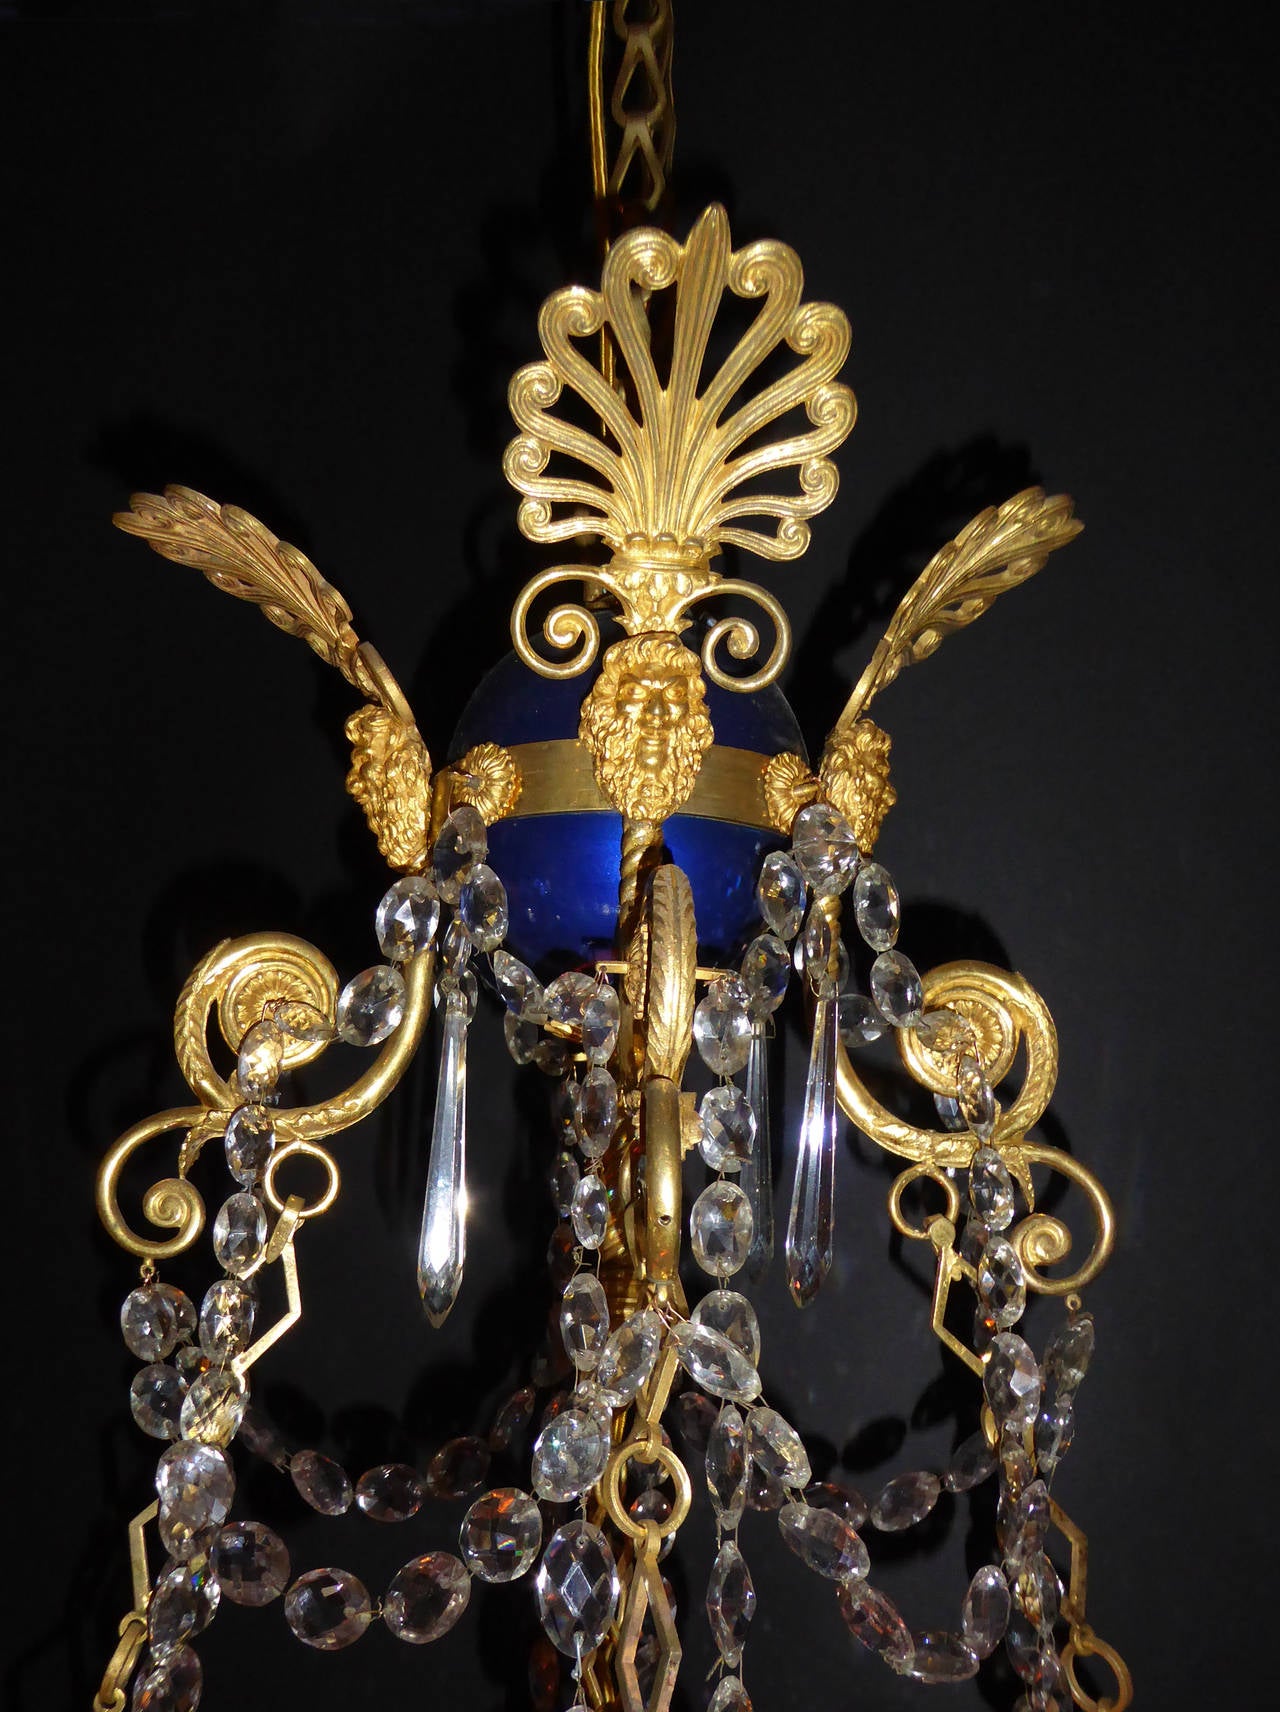 With blue corona, overall decorated with gilt bronze swans necks, palmettes and grotesque masks.